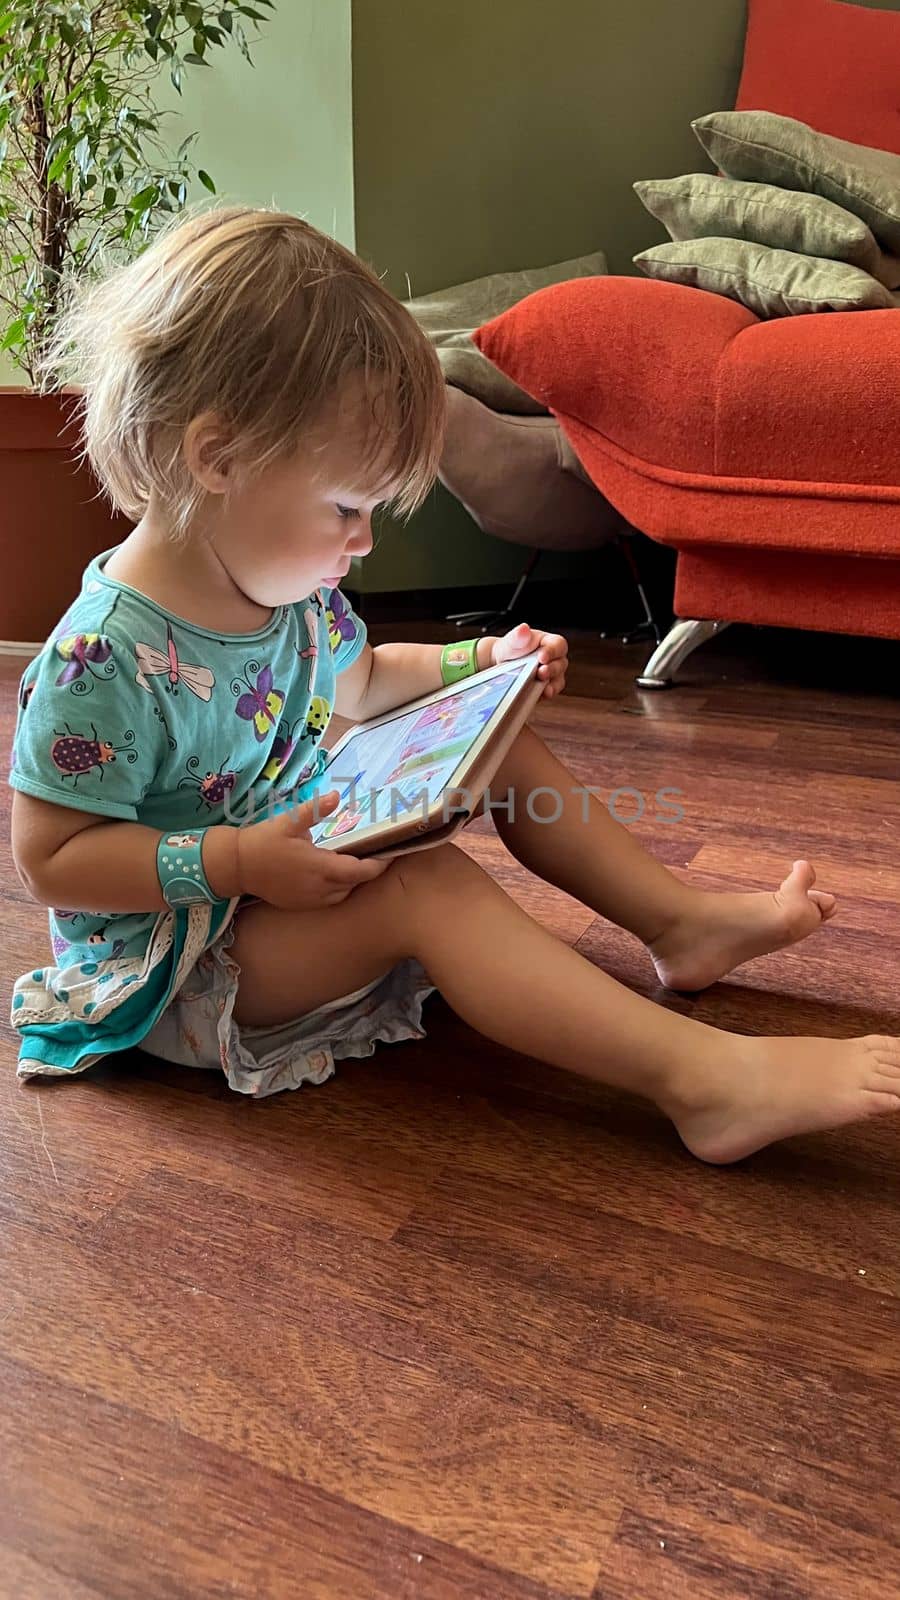 Toddler Girl sitting on the floor with a Tablet and watching it by Varaksina